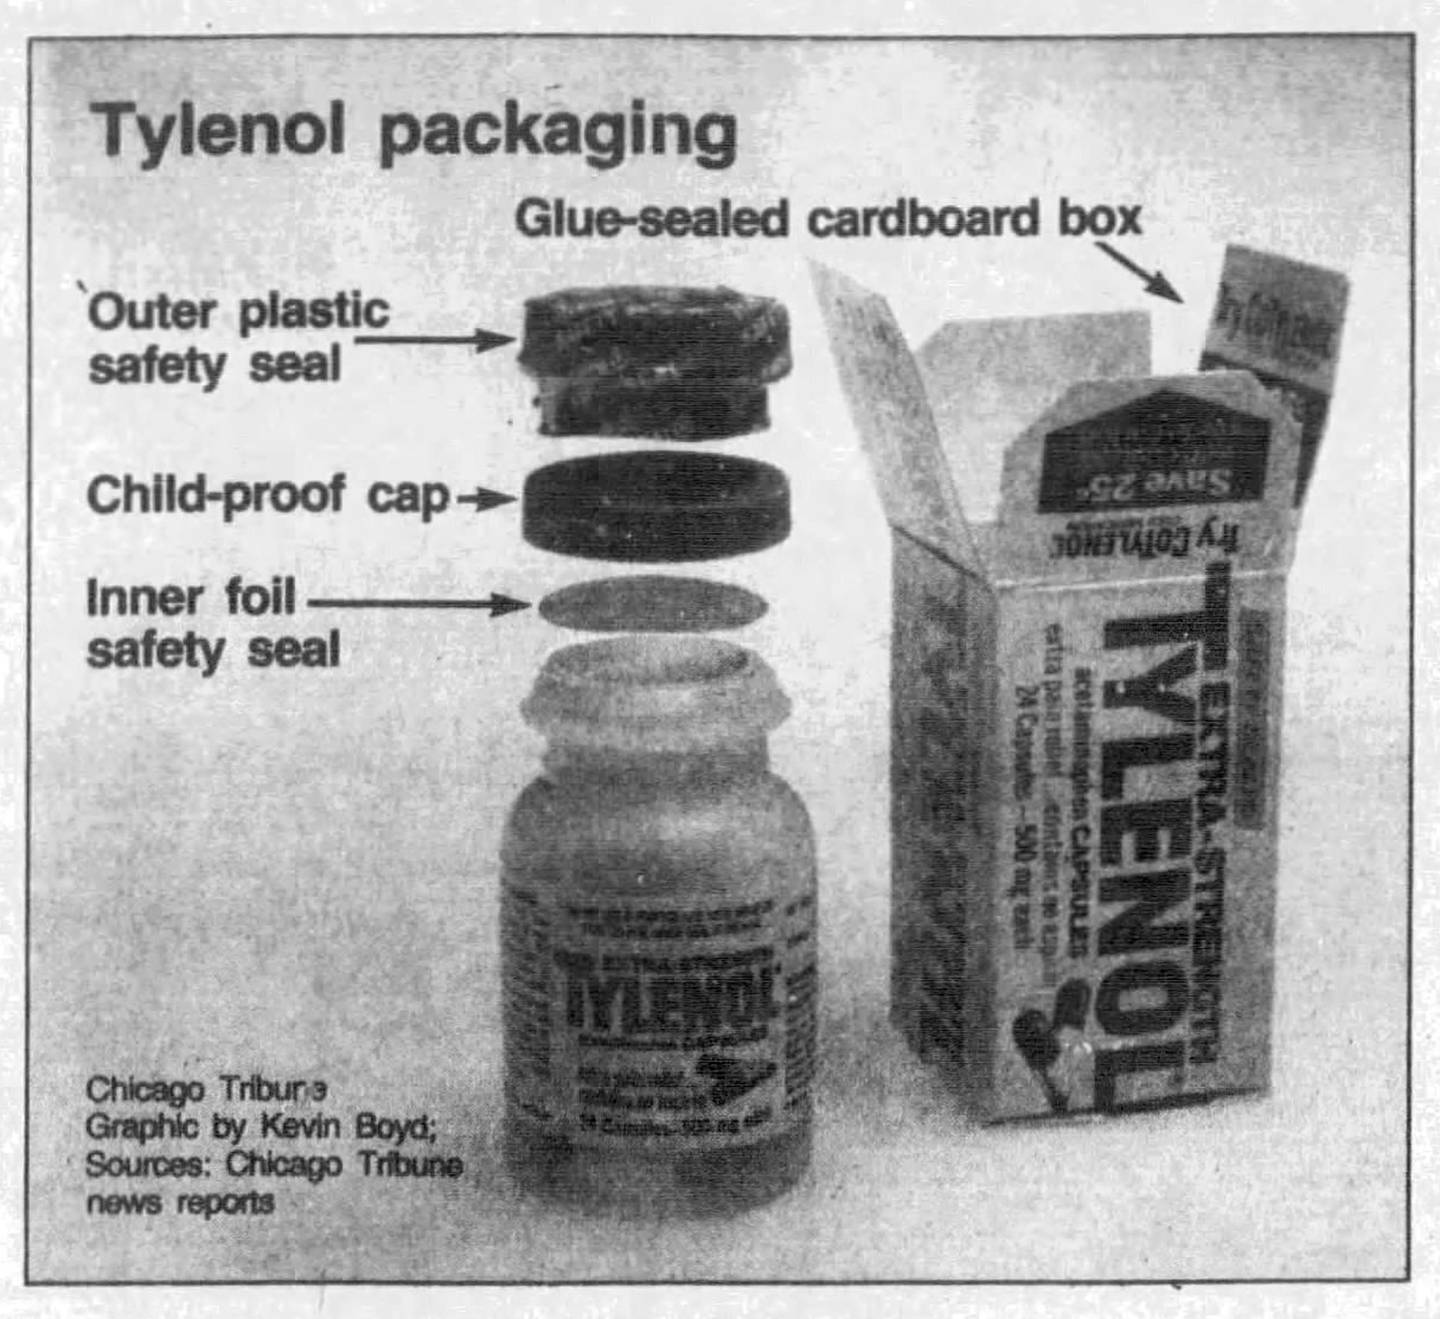 Less than two months after the murders, Johnson & Johnson introduced triple-sealed, tamper-resistant packaging.